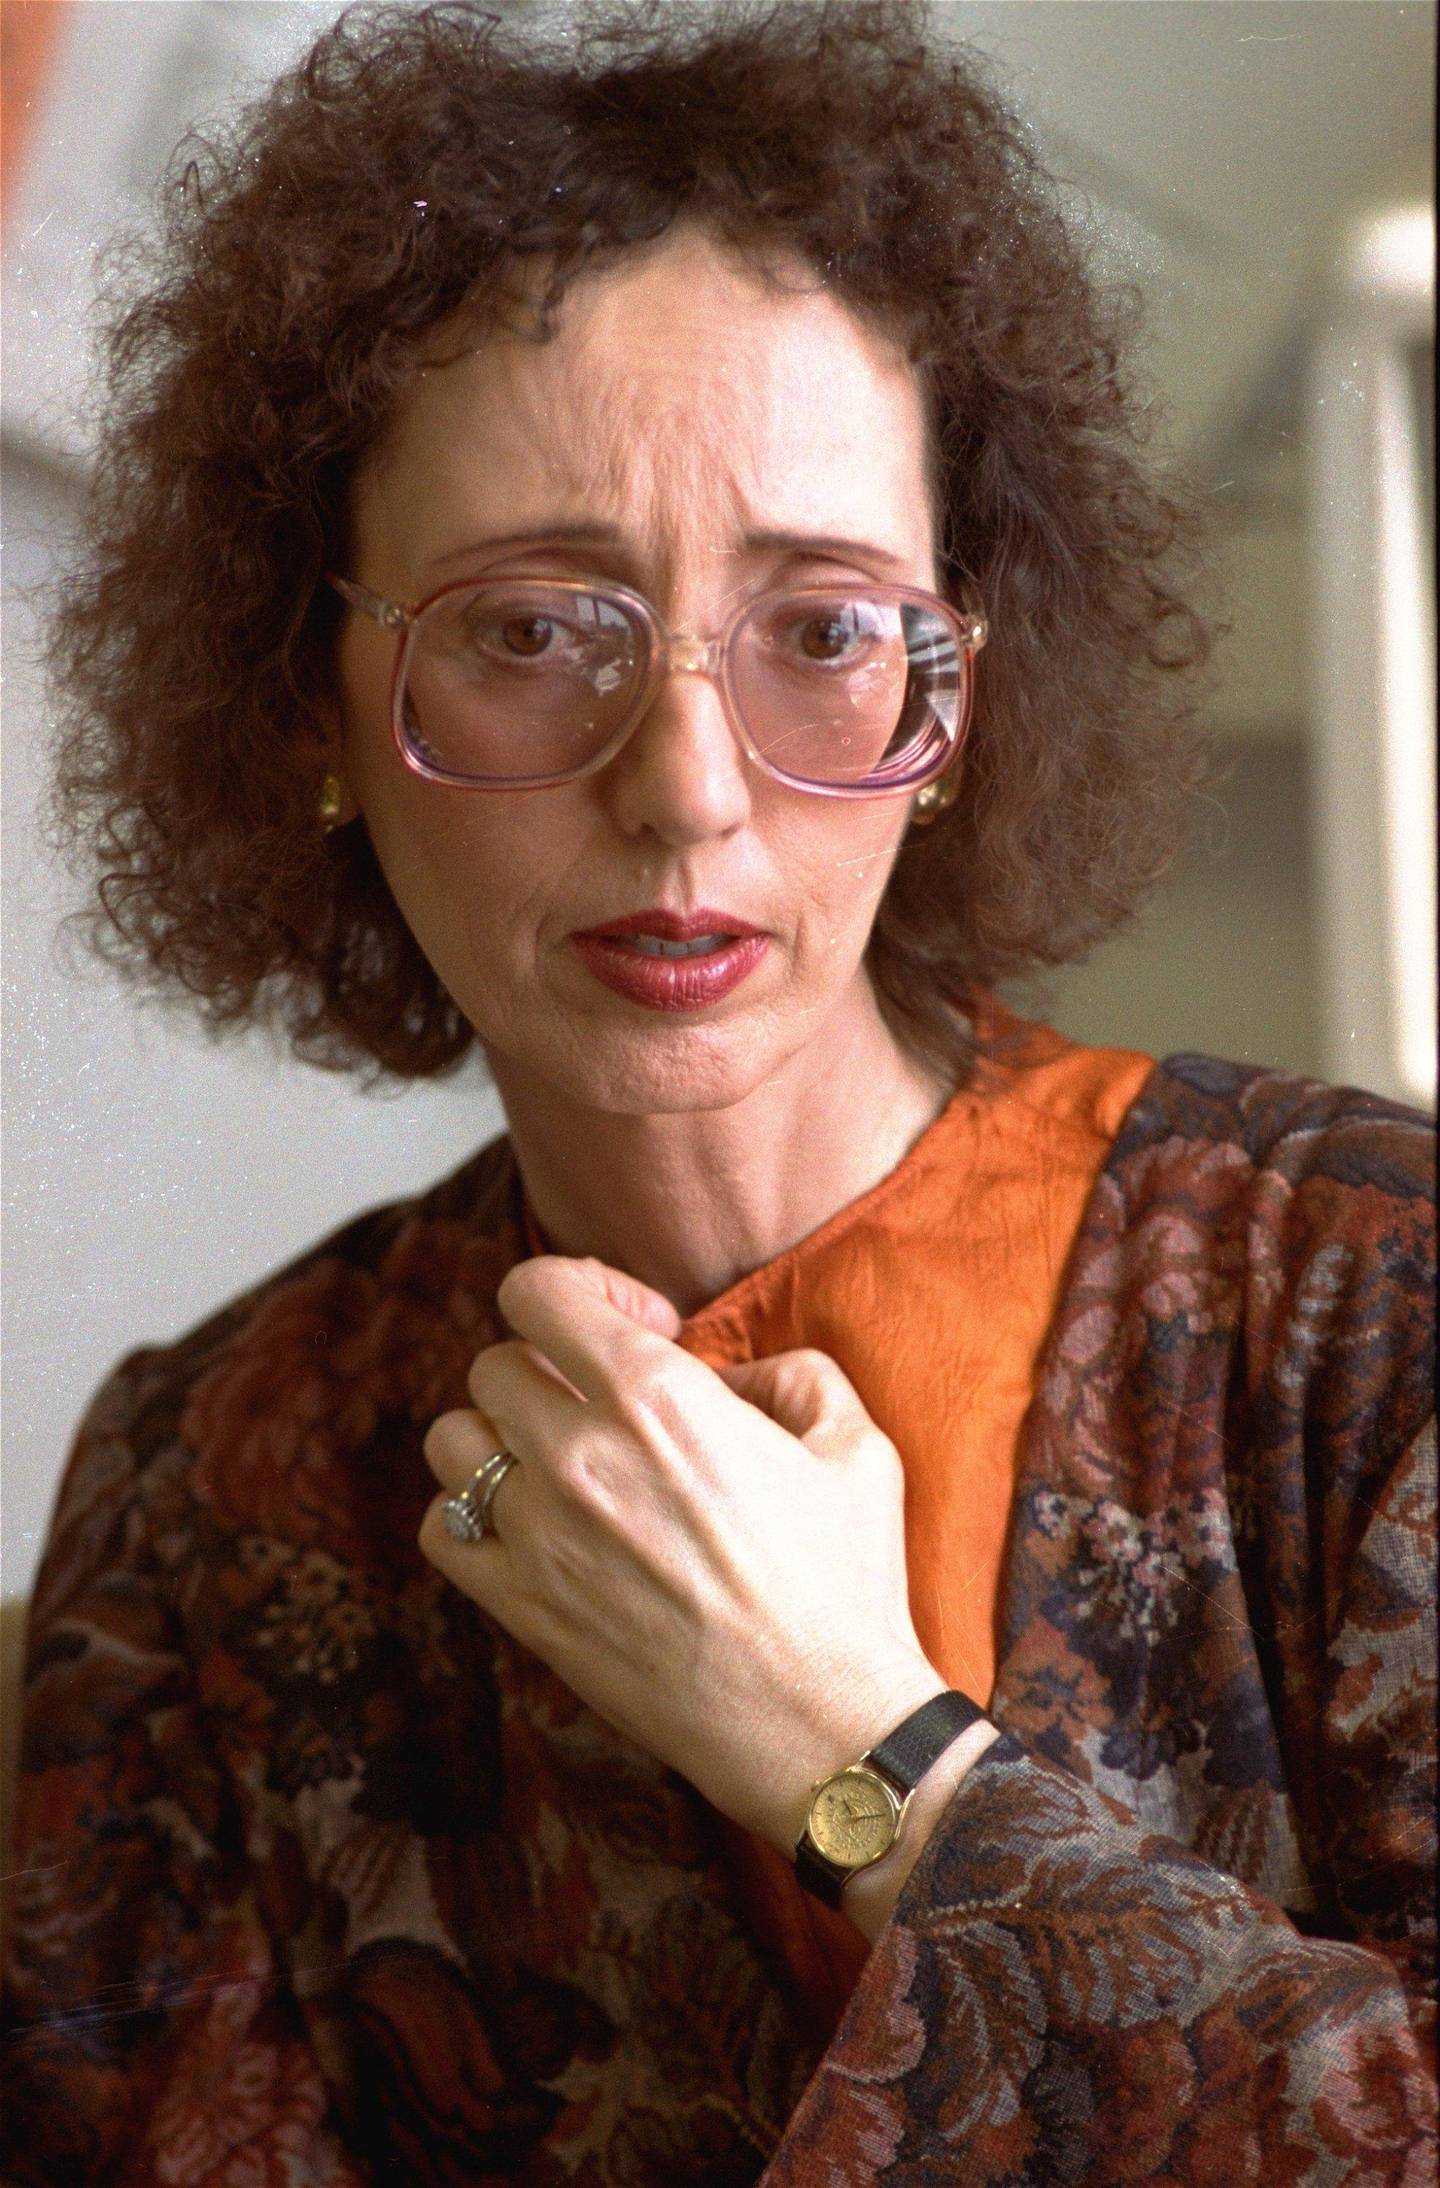 ** FILE ** American novelist Joyce Carol Oates is seen in this April 29,1992 file photo. Oates led the field of National Book Critics Circle finalists announced Saturday, Jan. 12, 2008 with nominations in both fiction and autobiography categories.  (AP Photo, file)